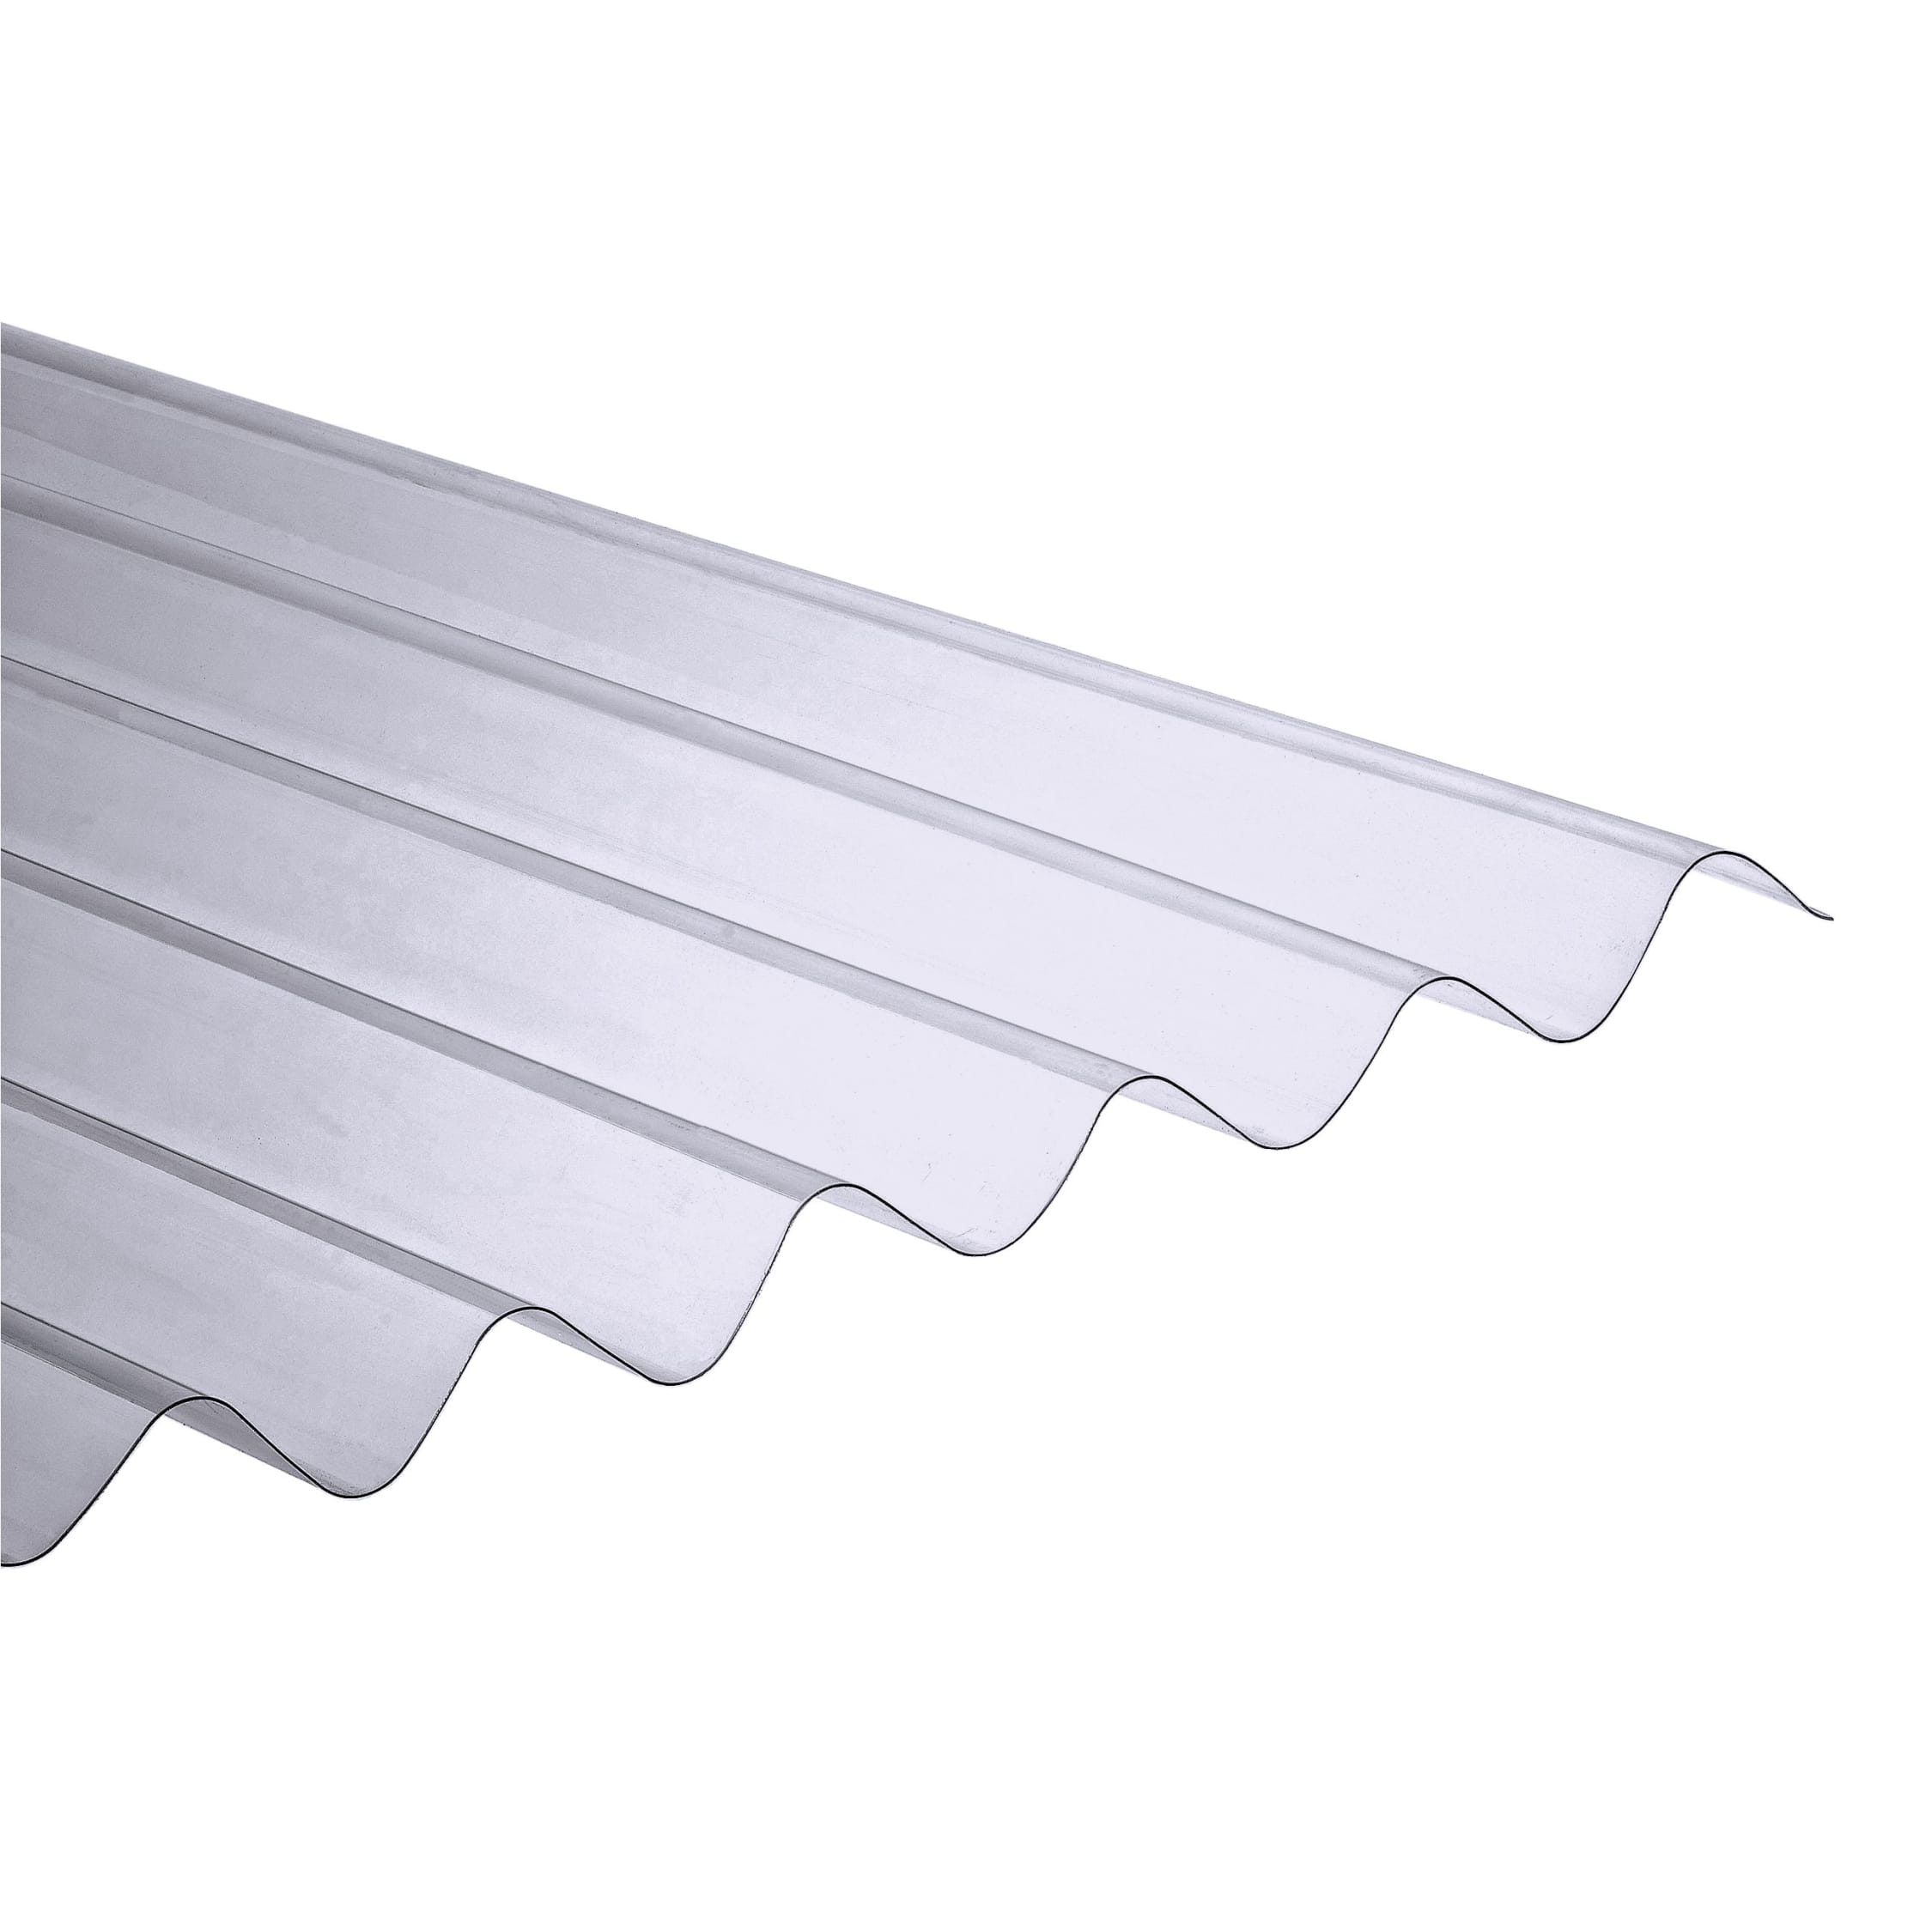 Onduline Corrugated Polycarbonate Sheet, Corrugated Metal Roofing Sheets Wickes